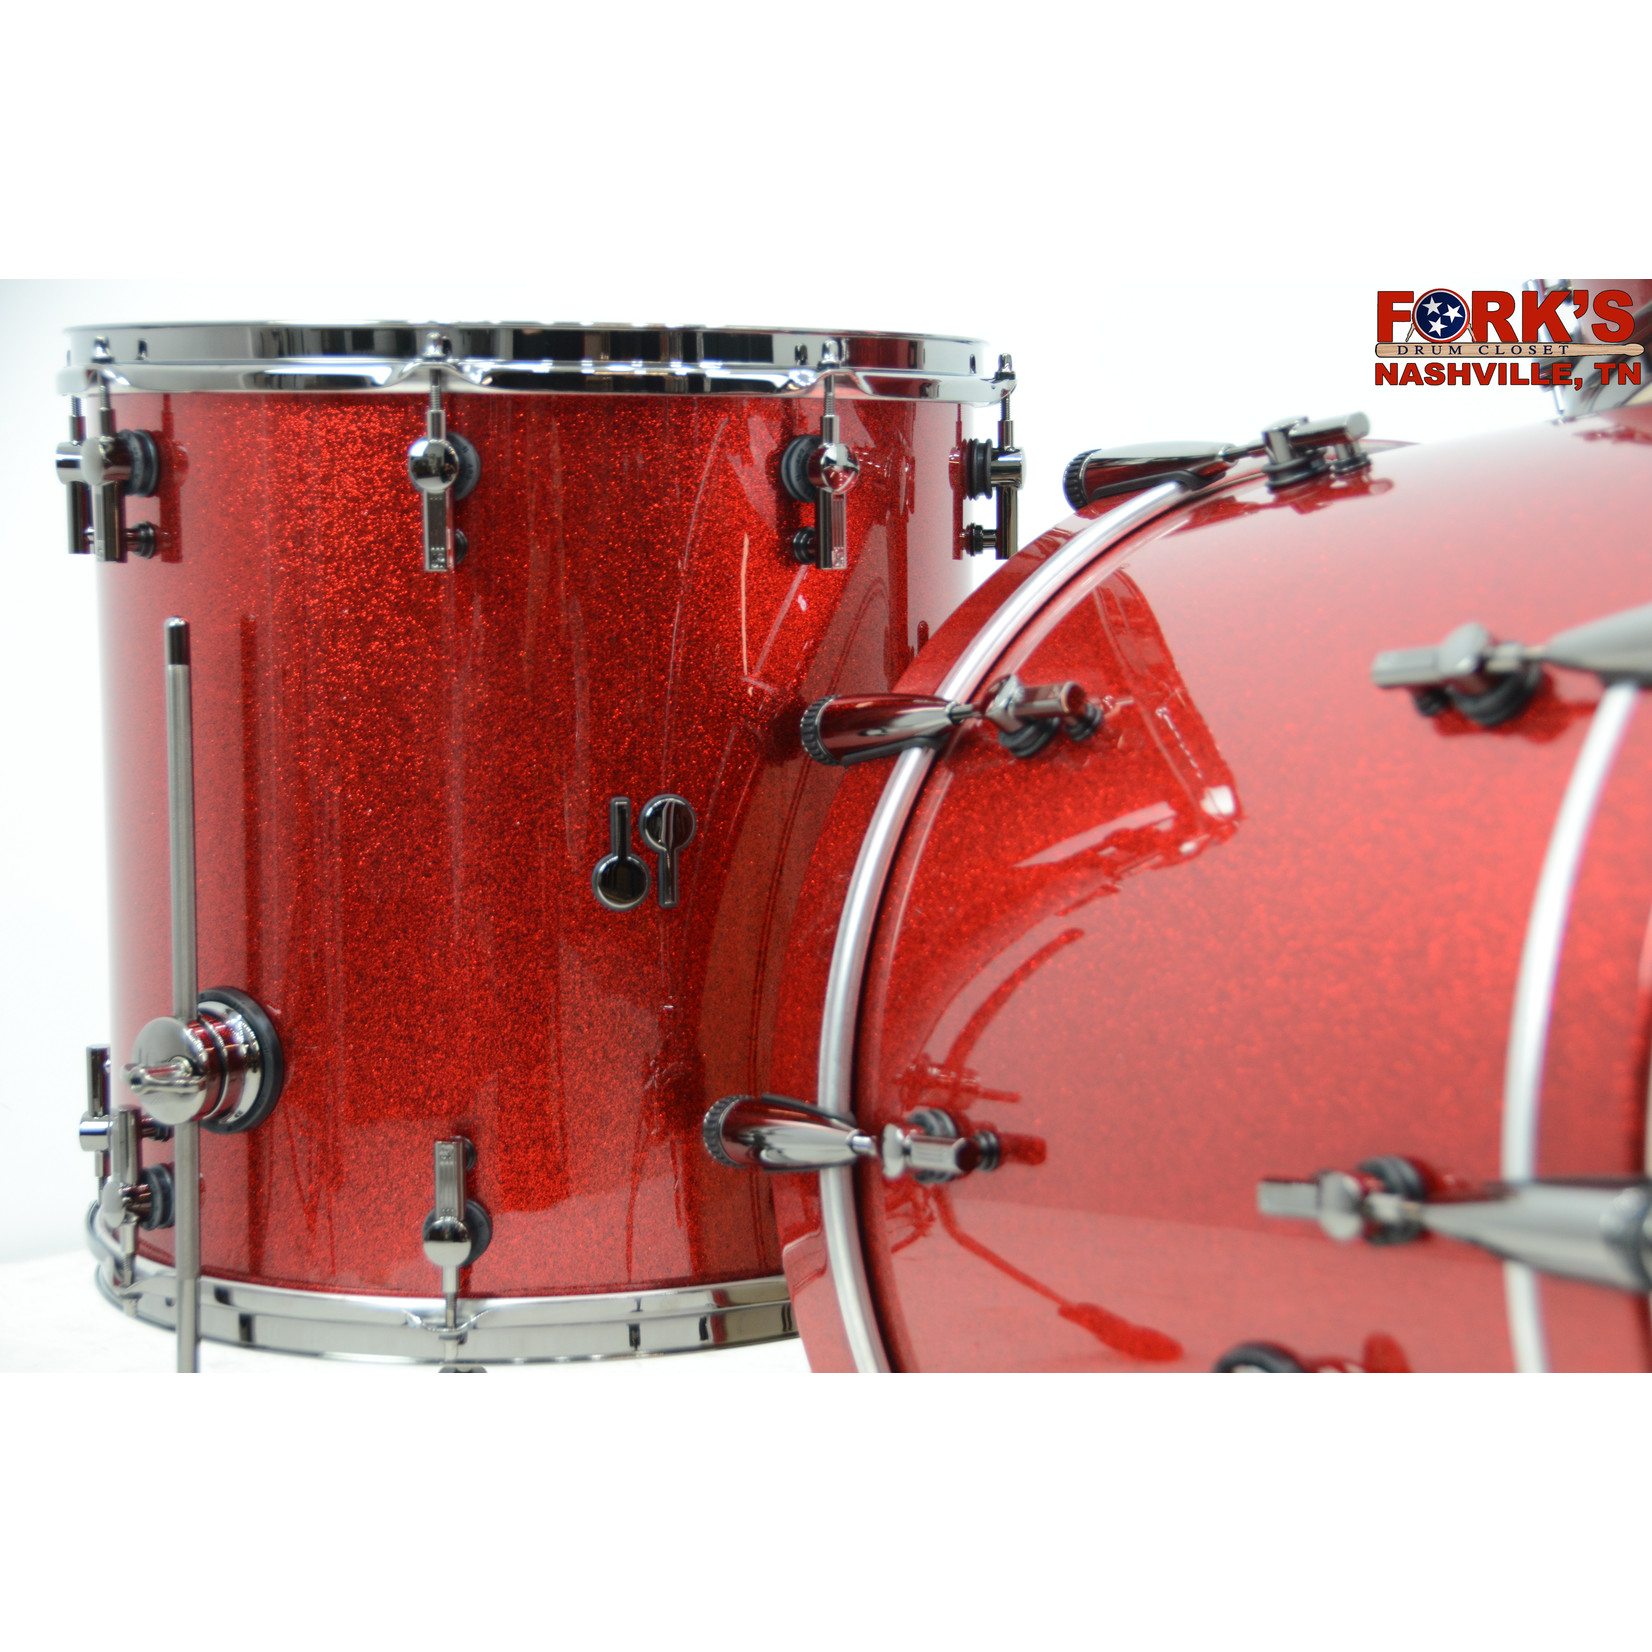 Sonor Sonor SQ2 3pc Drum Kit "Red Sparkle"